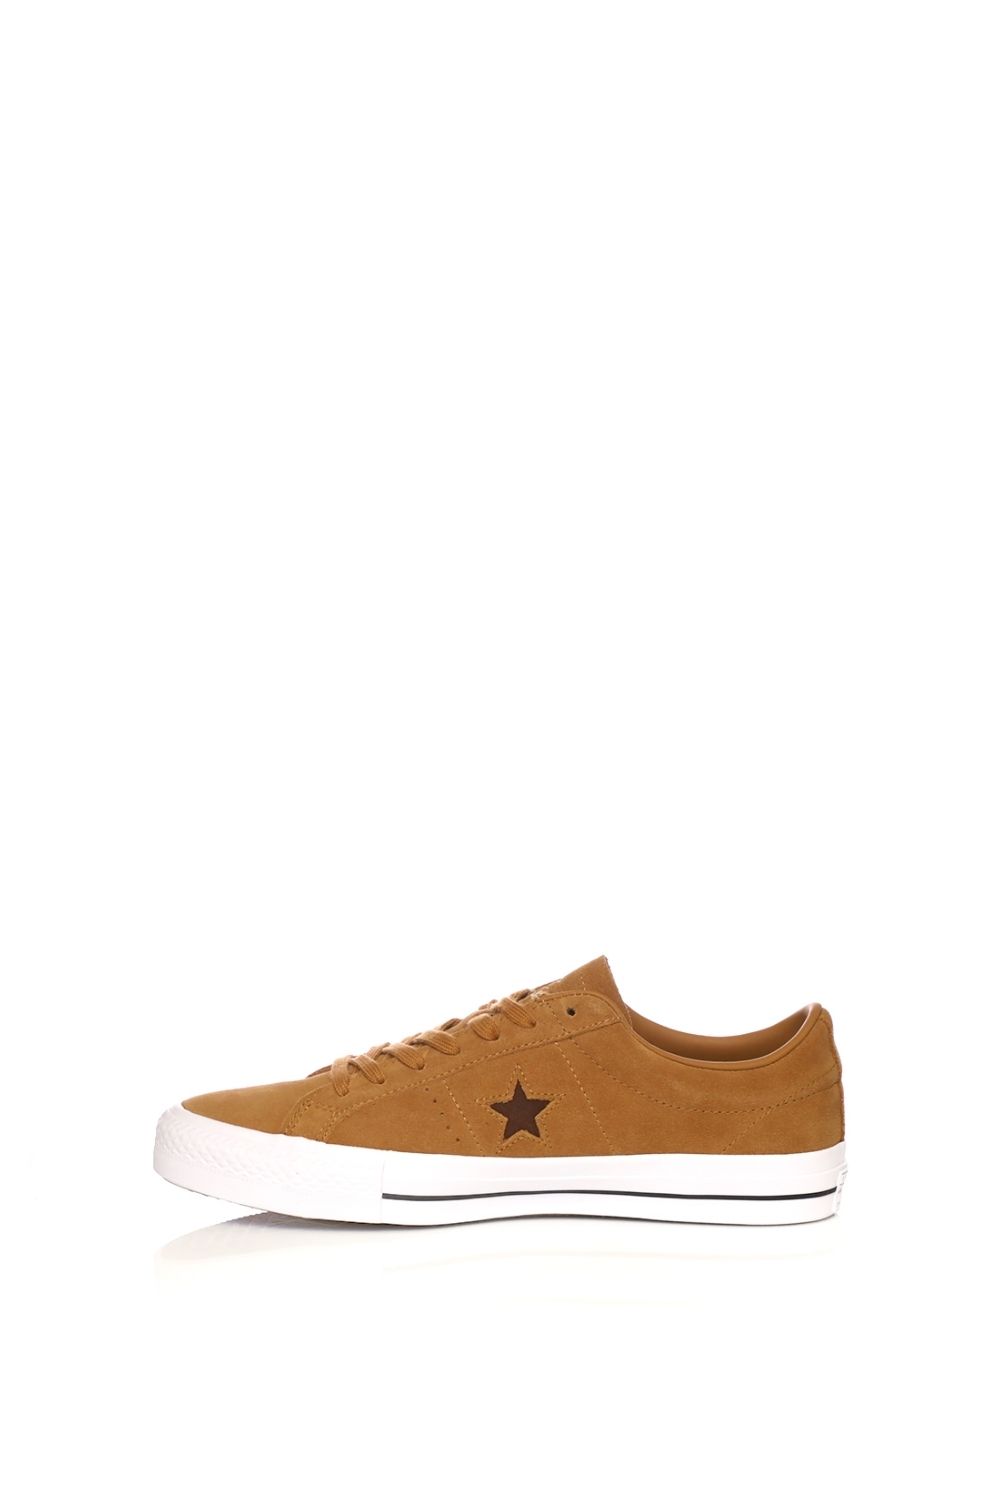 CONVERSE - Ανδρικά sneakers Converse One Star Pro Ox καφέ Ανδρικά/Παπούτσια/Sneakers